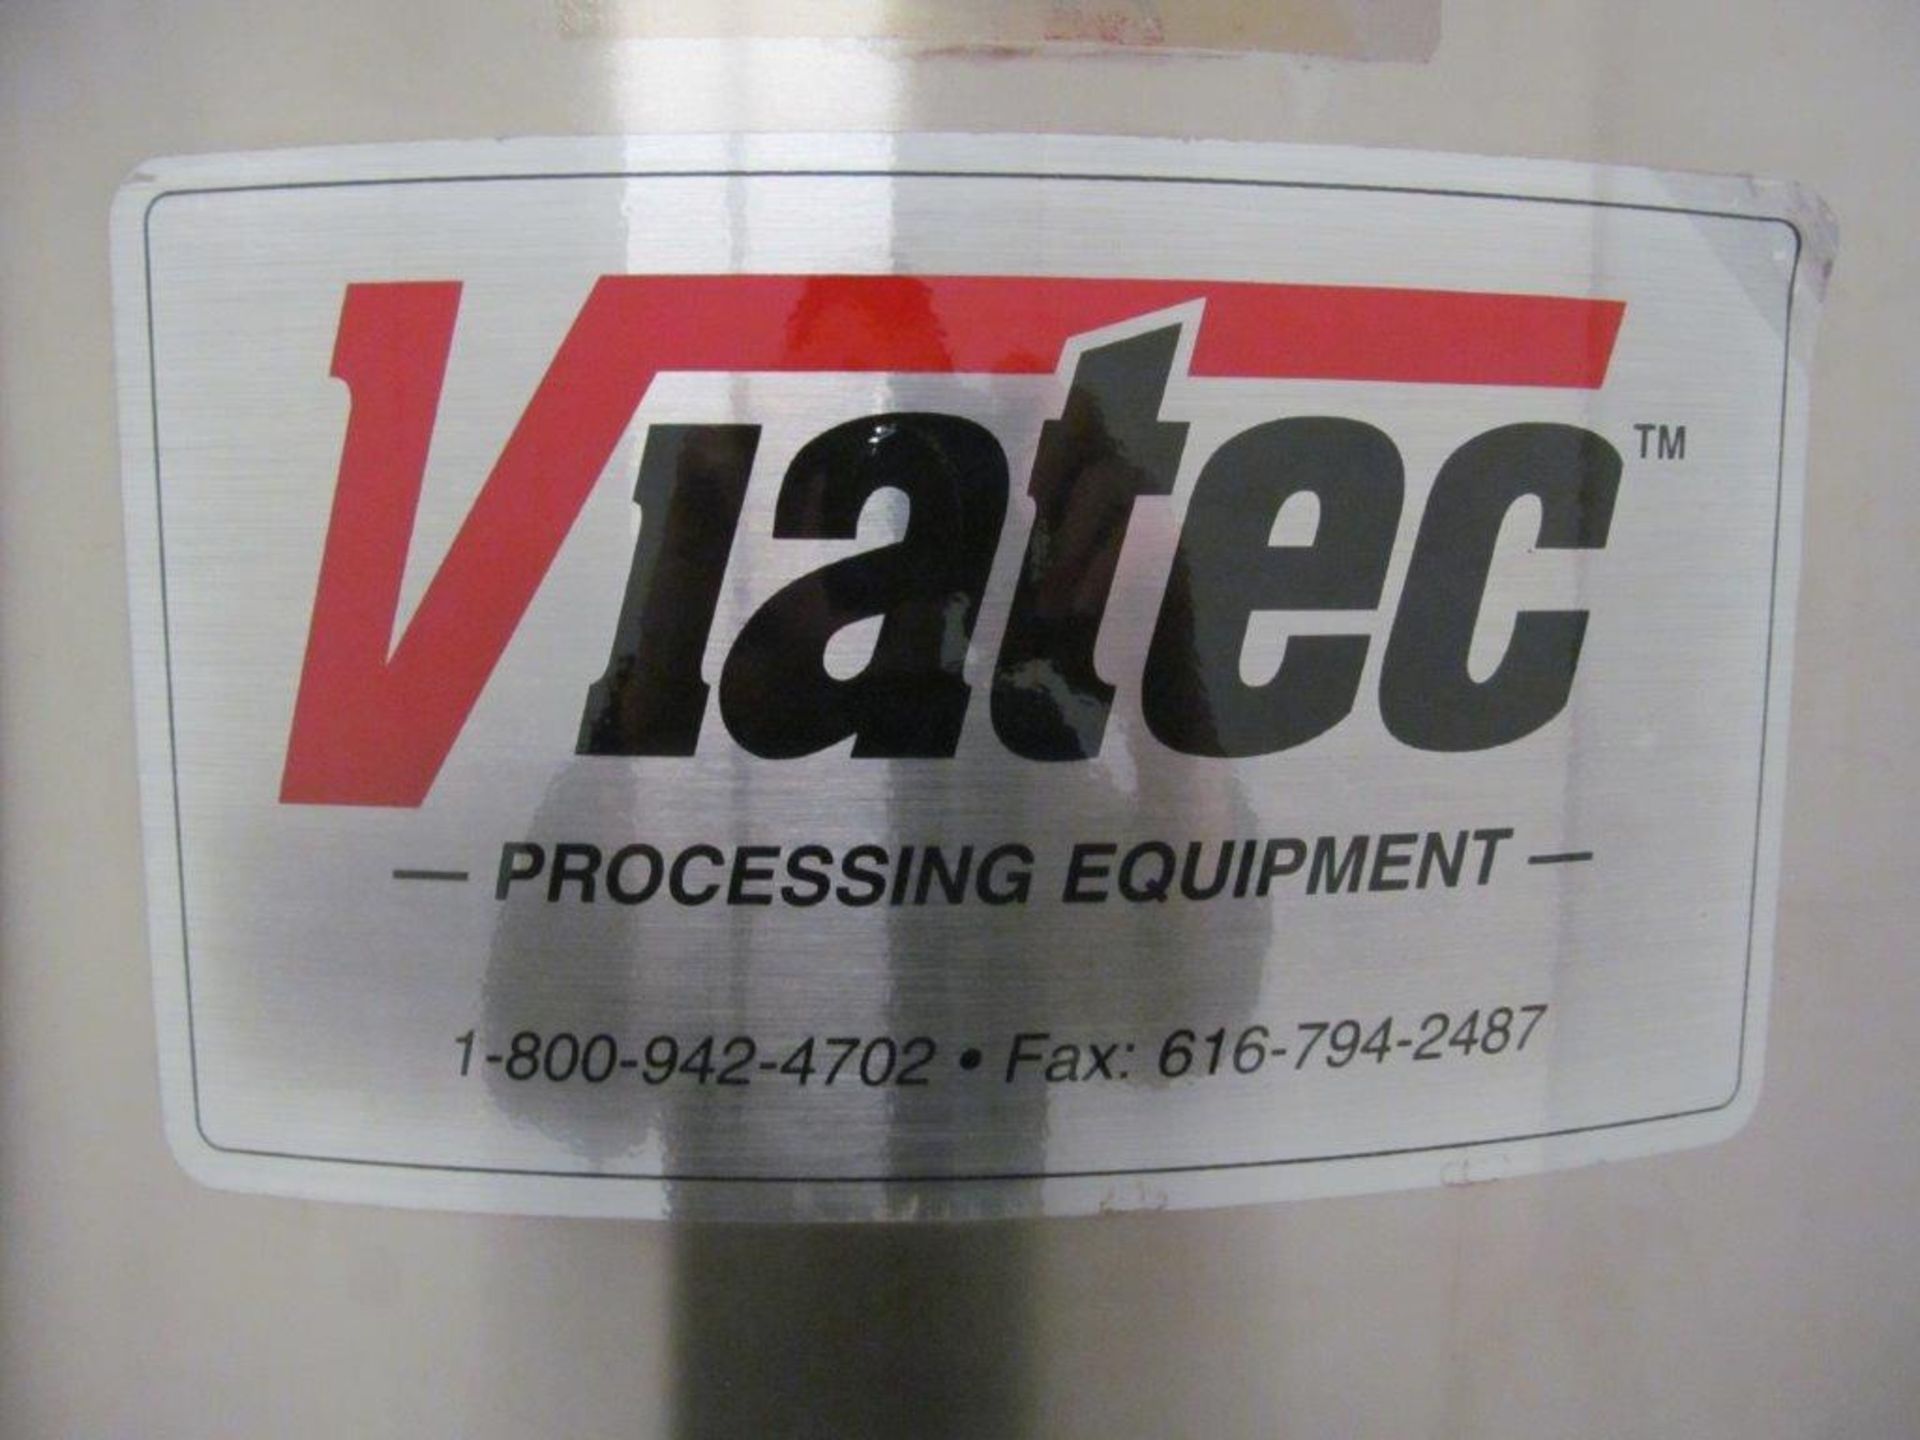 STAINLESS STEEL HOLDING TANK, MFG: VIATEC (USA), INSIDE DIMENSIONS: 38" DIA X 48" DEEP, C/W - Image 6 of 6